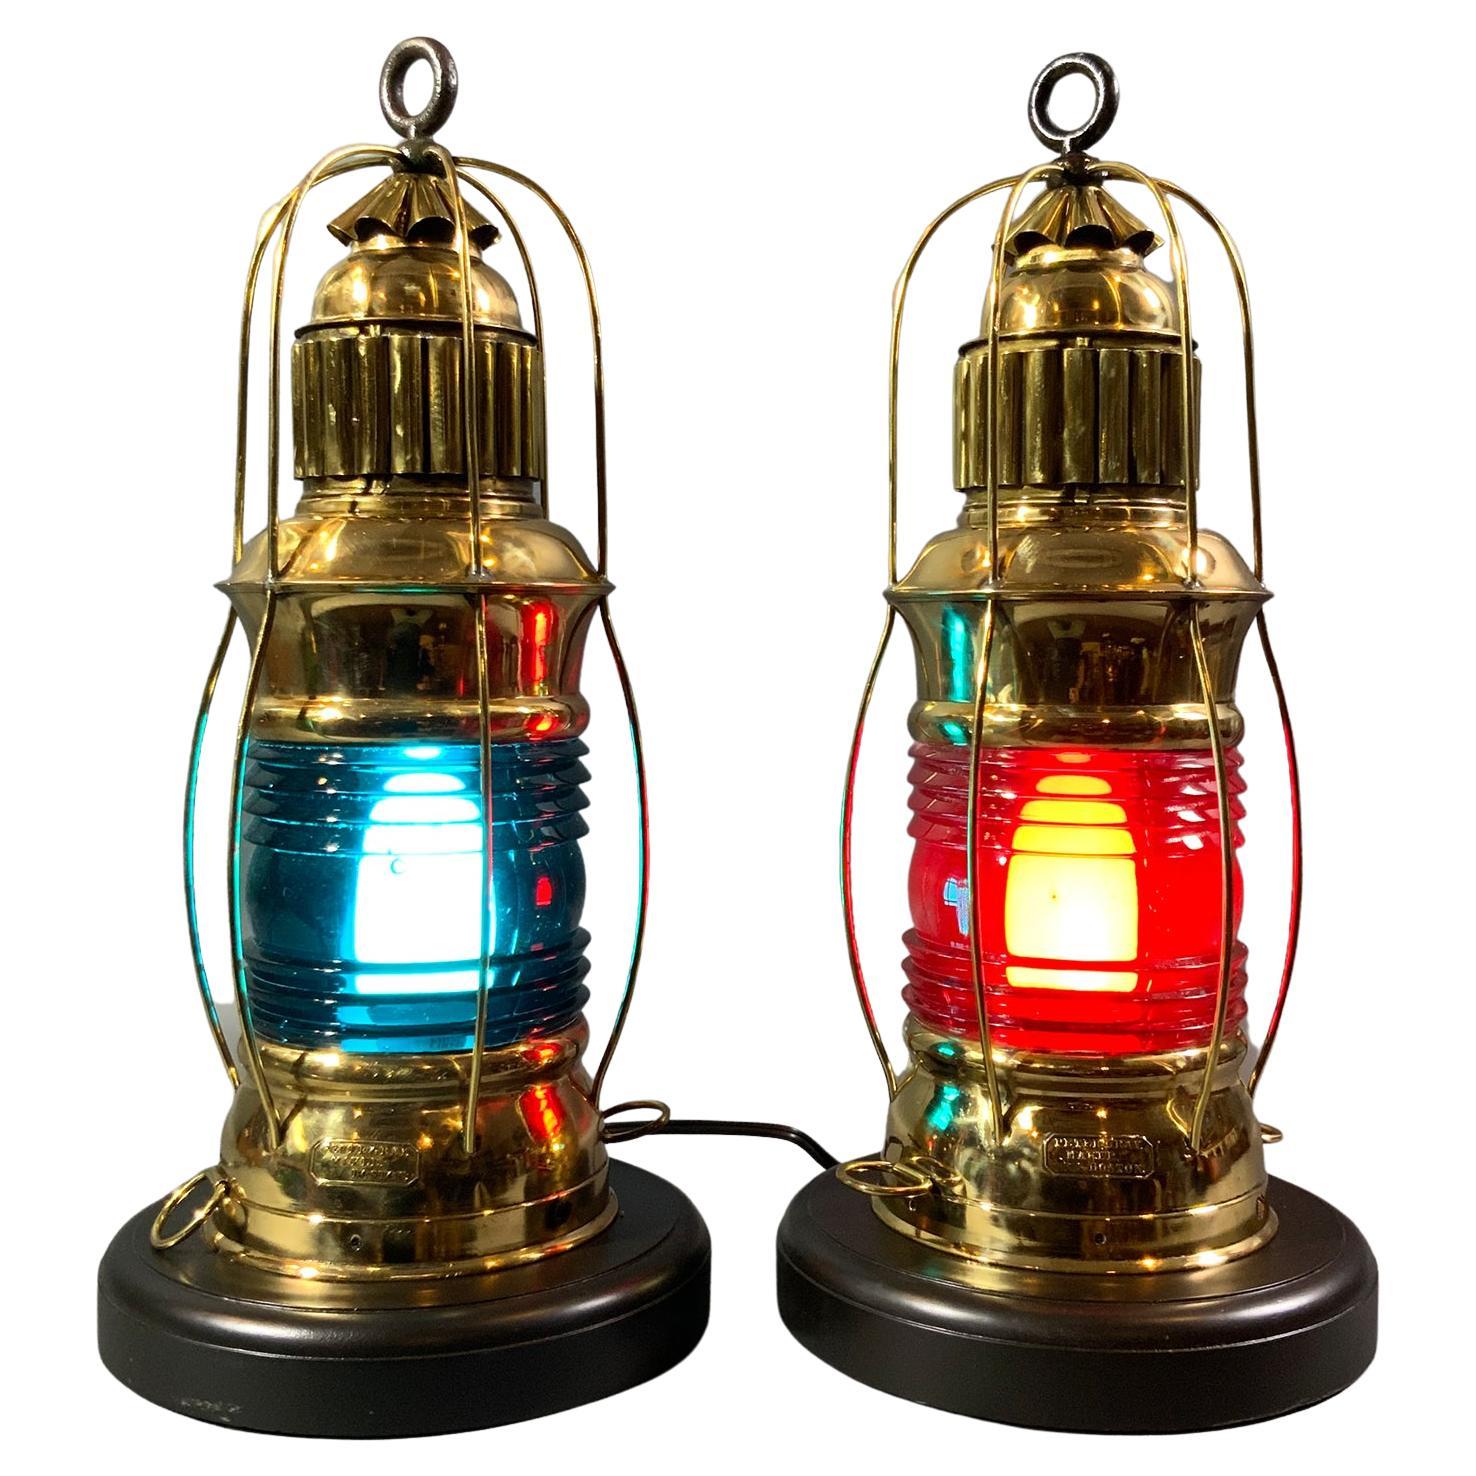 Outstanding Pair of Marine Lanterns by Peter Gray of Boston For Sale